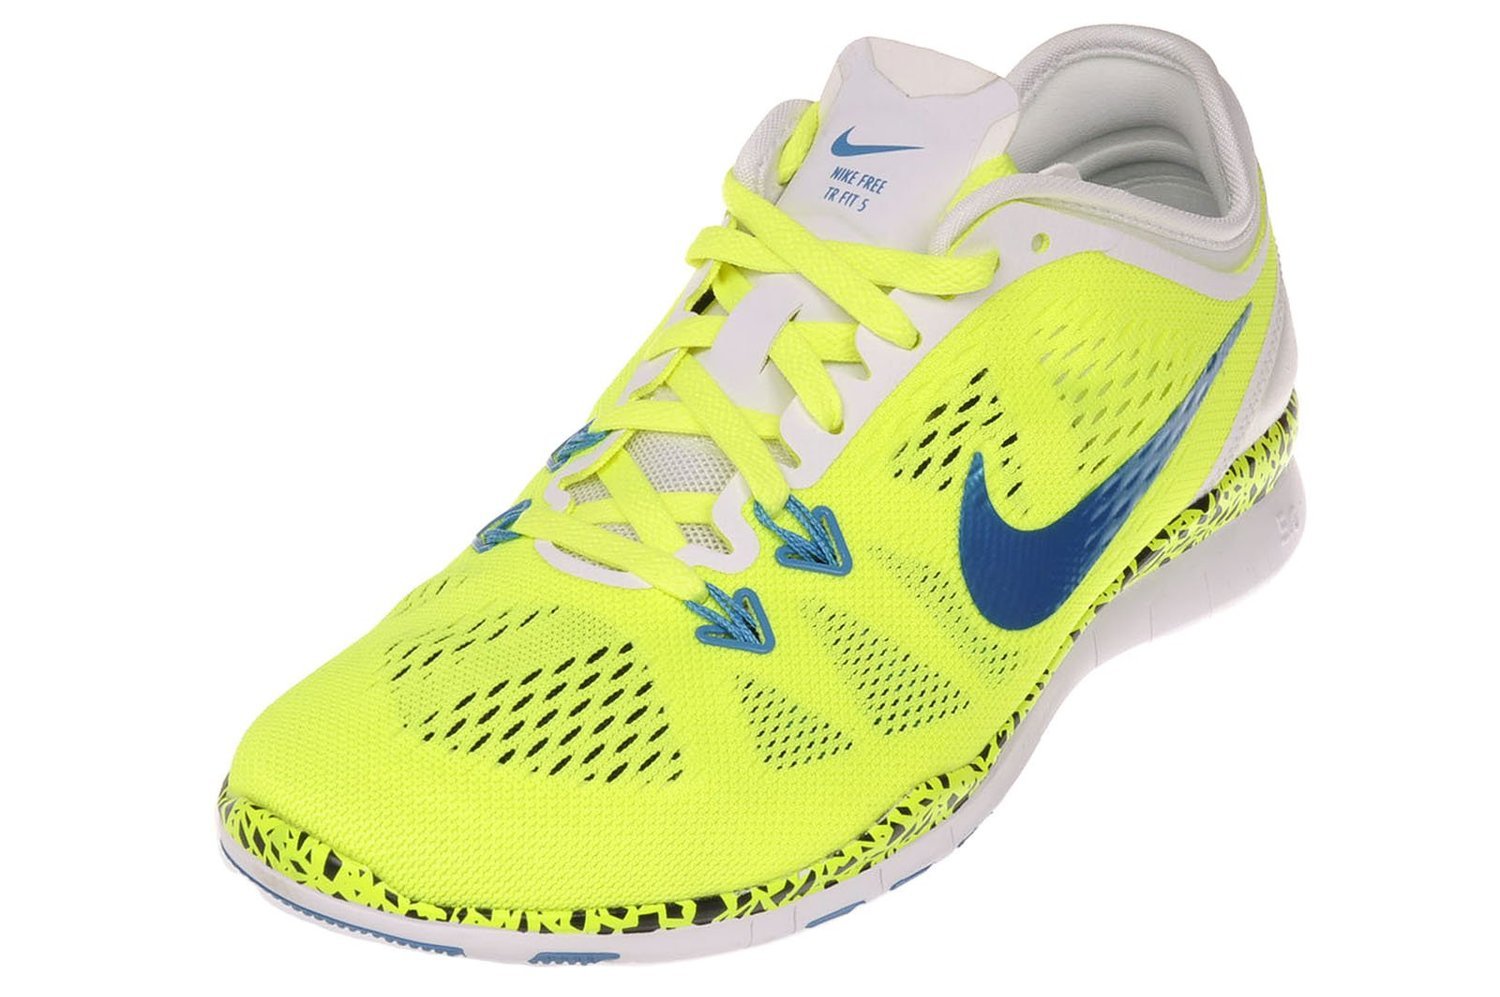 Nike Womens Free 5.0 TR FIT 5 WC Running Shoes Volt White Light Blue - image 1 of 1